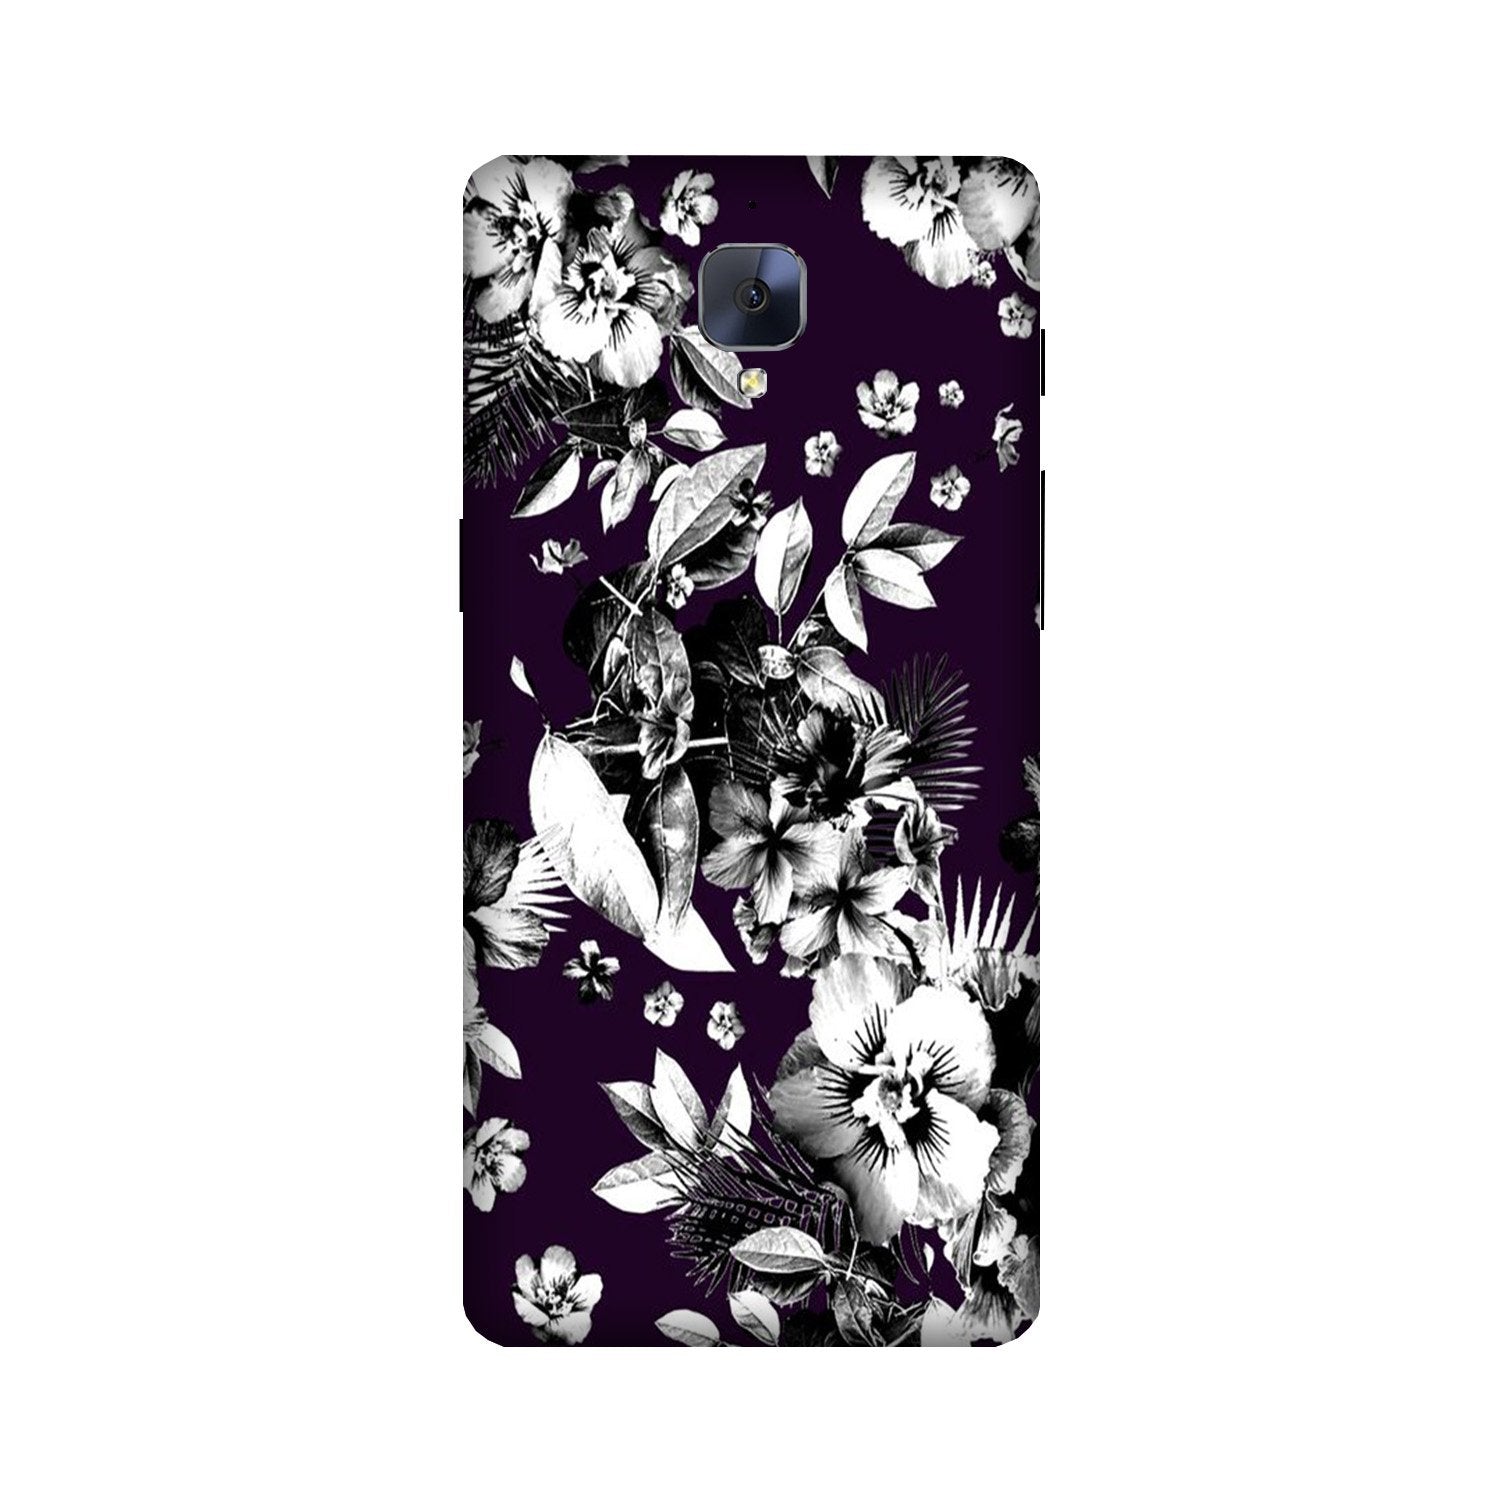 white flowers Case for OnePlus 3/ 3T